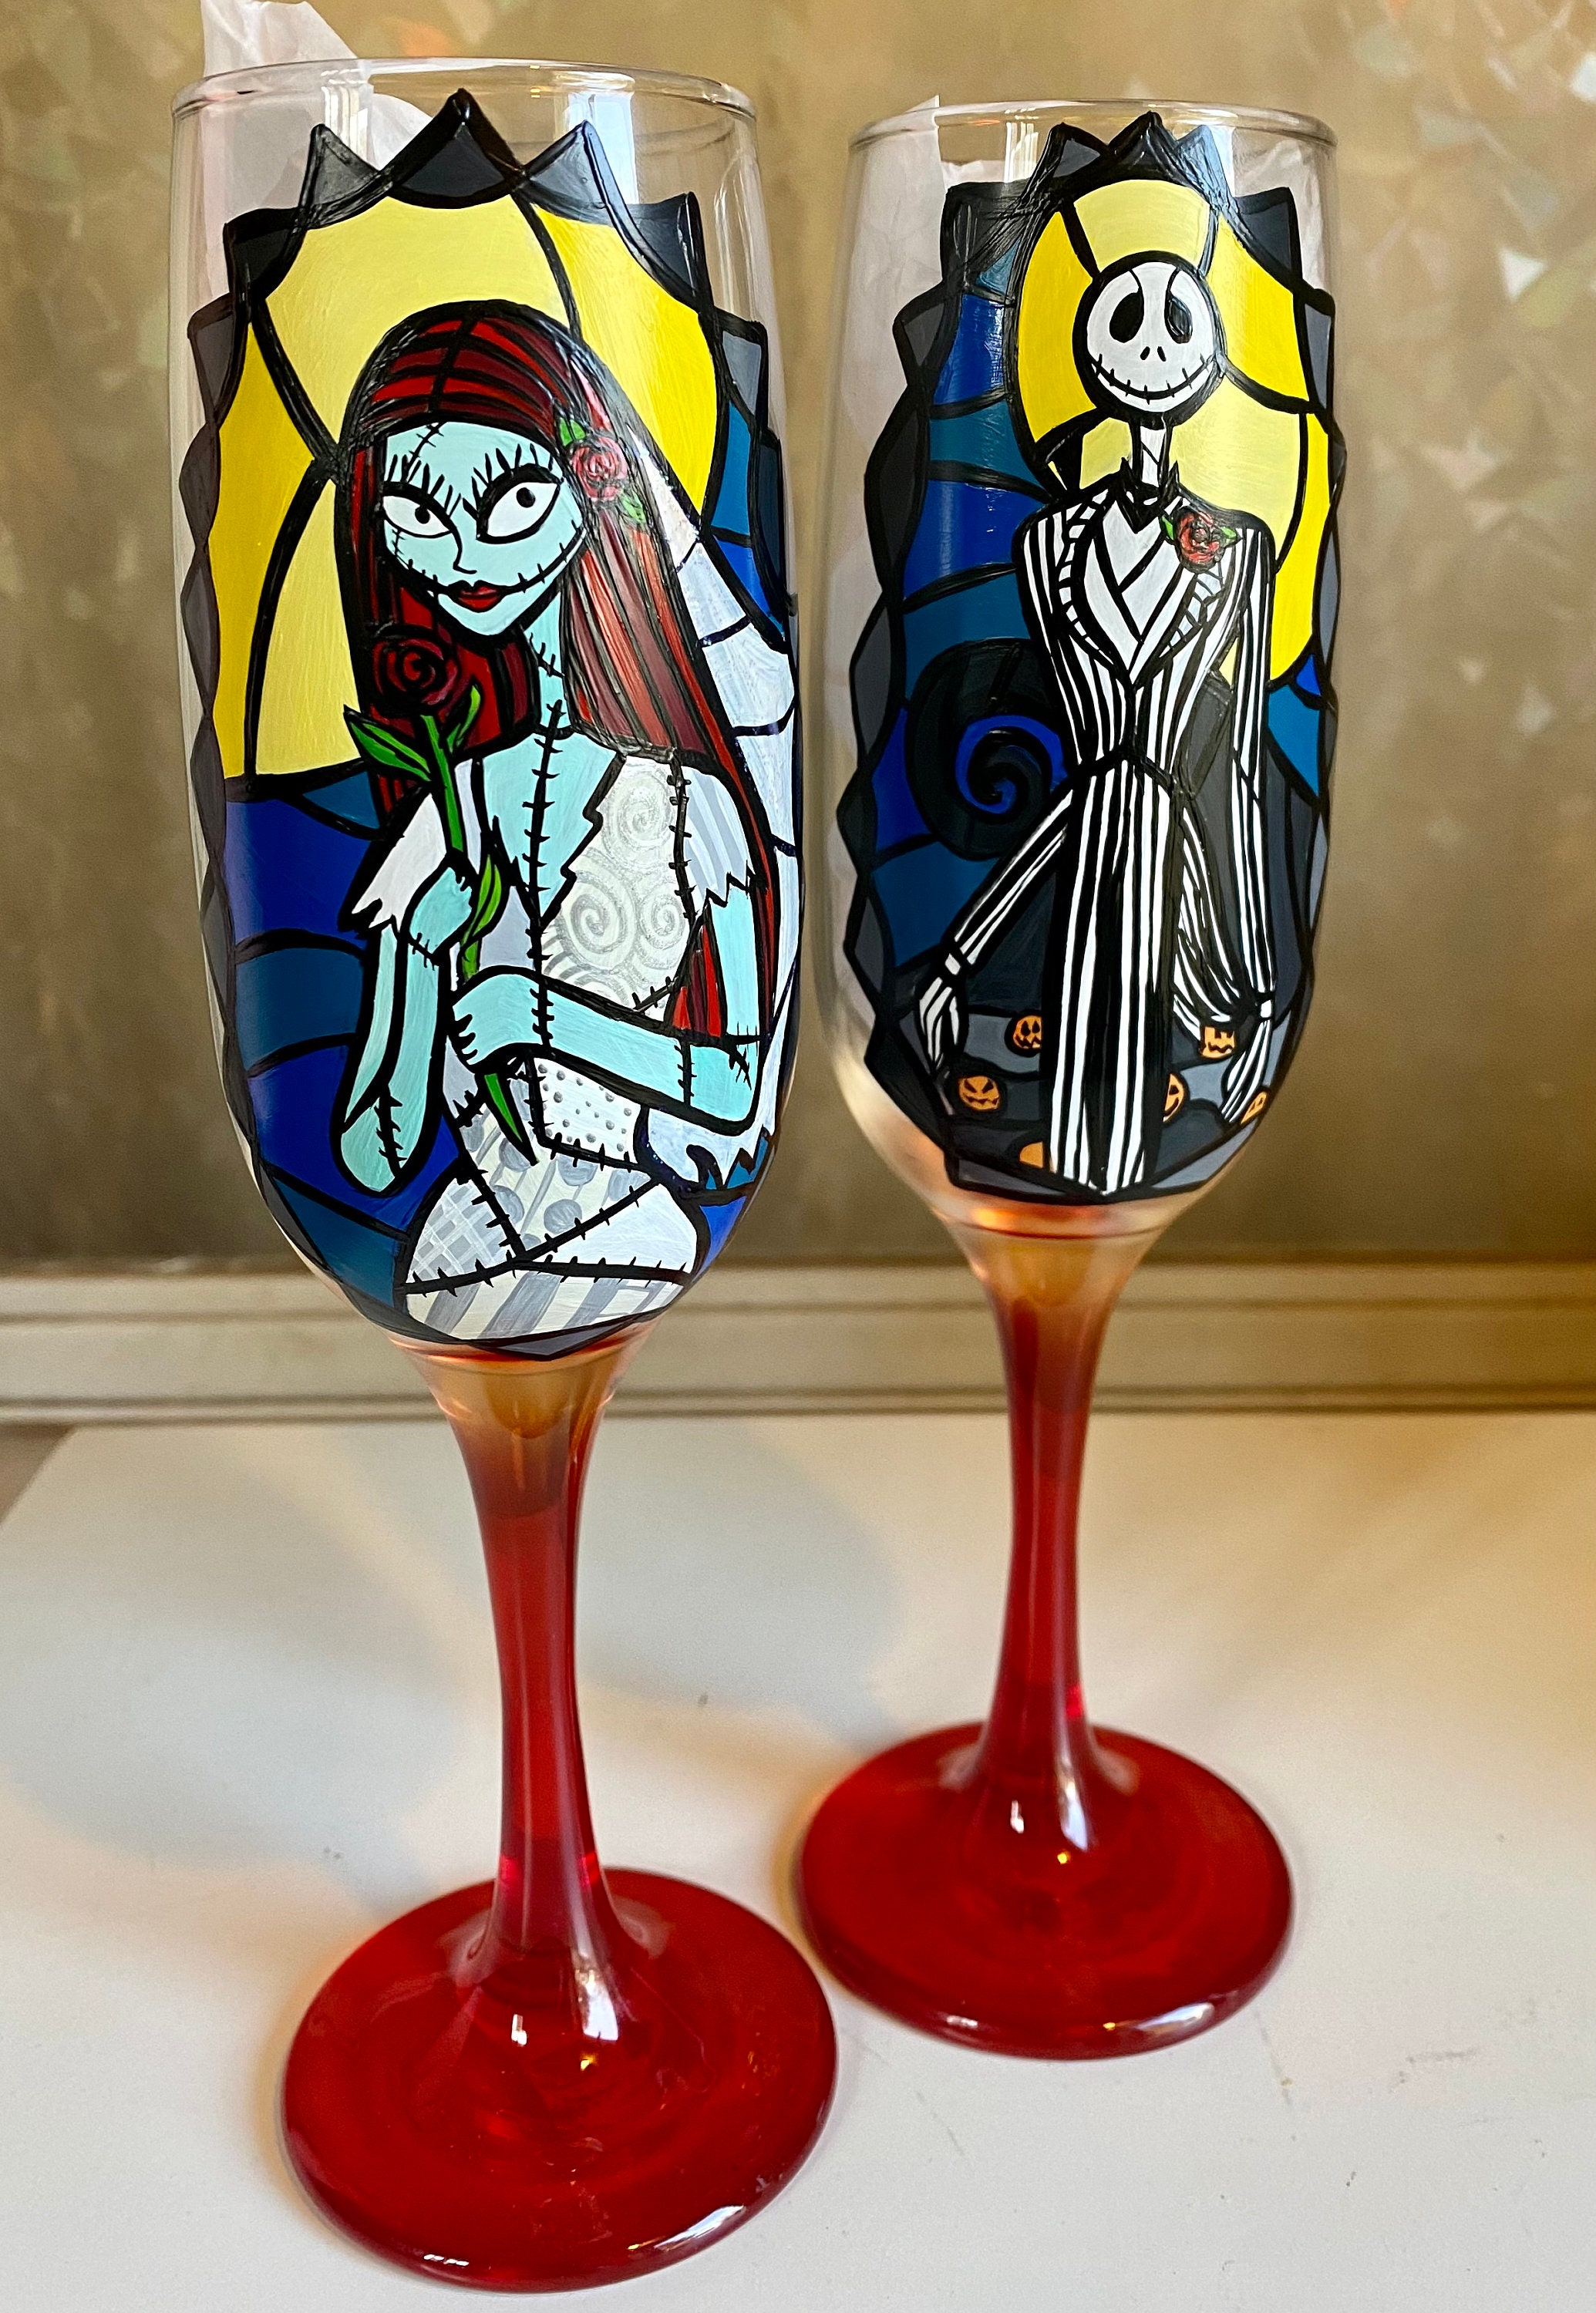 Nightmare before Christmas wine glasses - Wine & Champagne Glasses, Facebook Marketplace